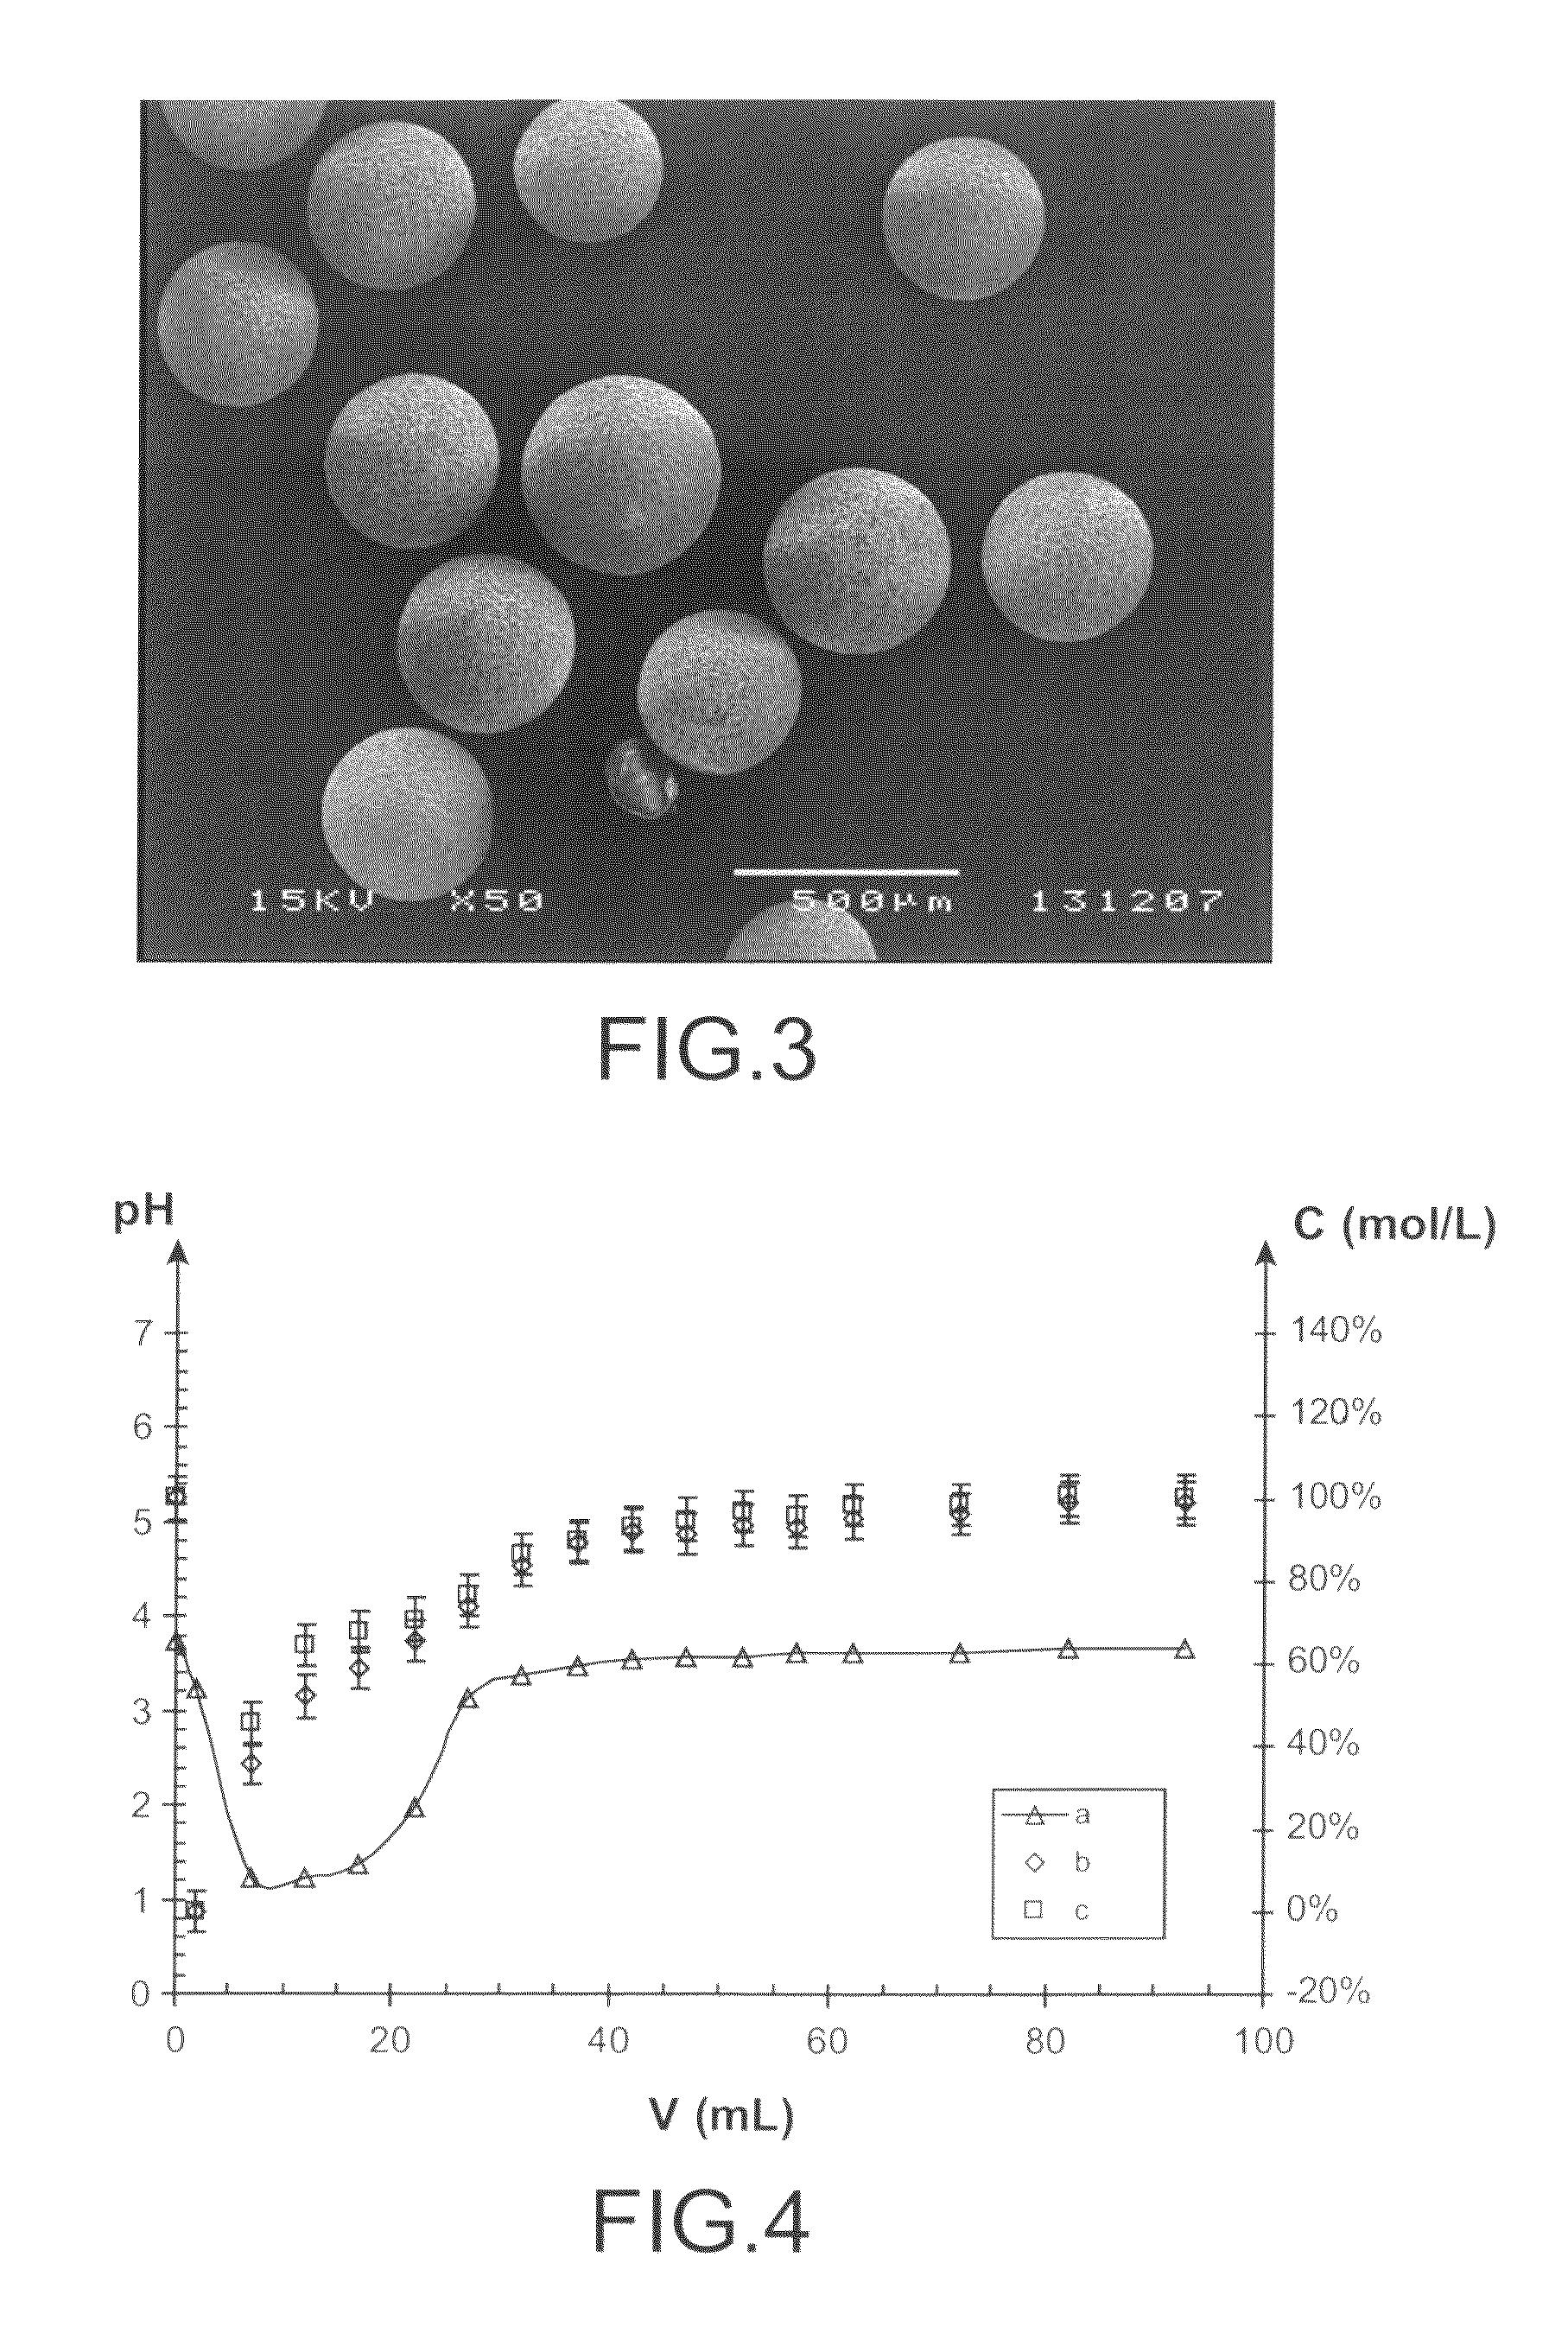 Method for preparing a mixed fuel comprising uranium and at least one actinide and/or lanthanide applying a cation exchange resin